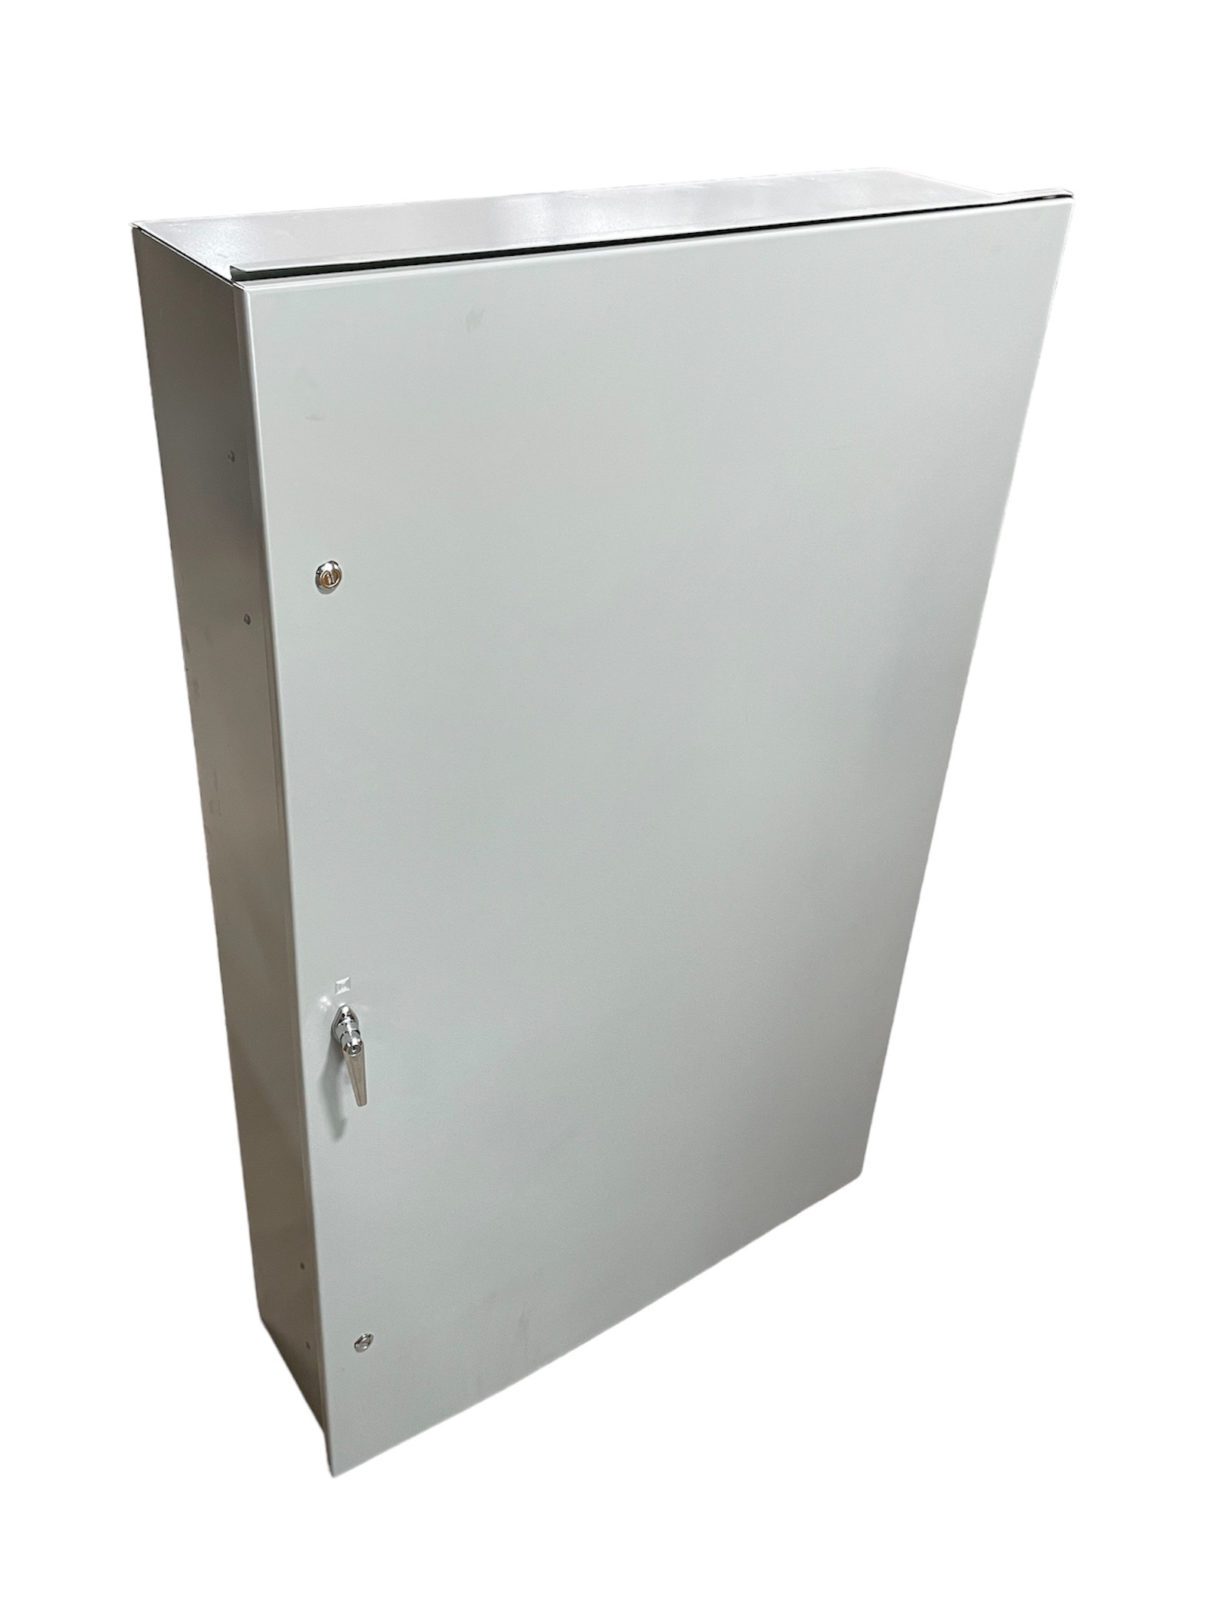 SQUARED-3P4W-600A-480V-24C-MB-PANEL